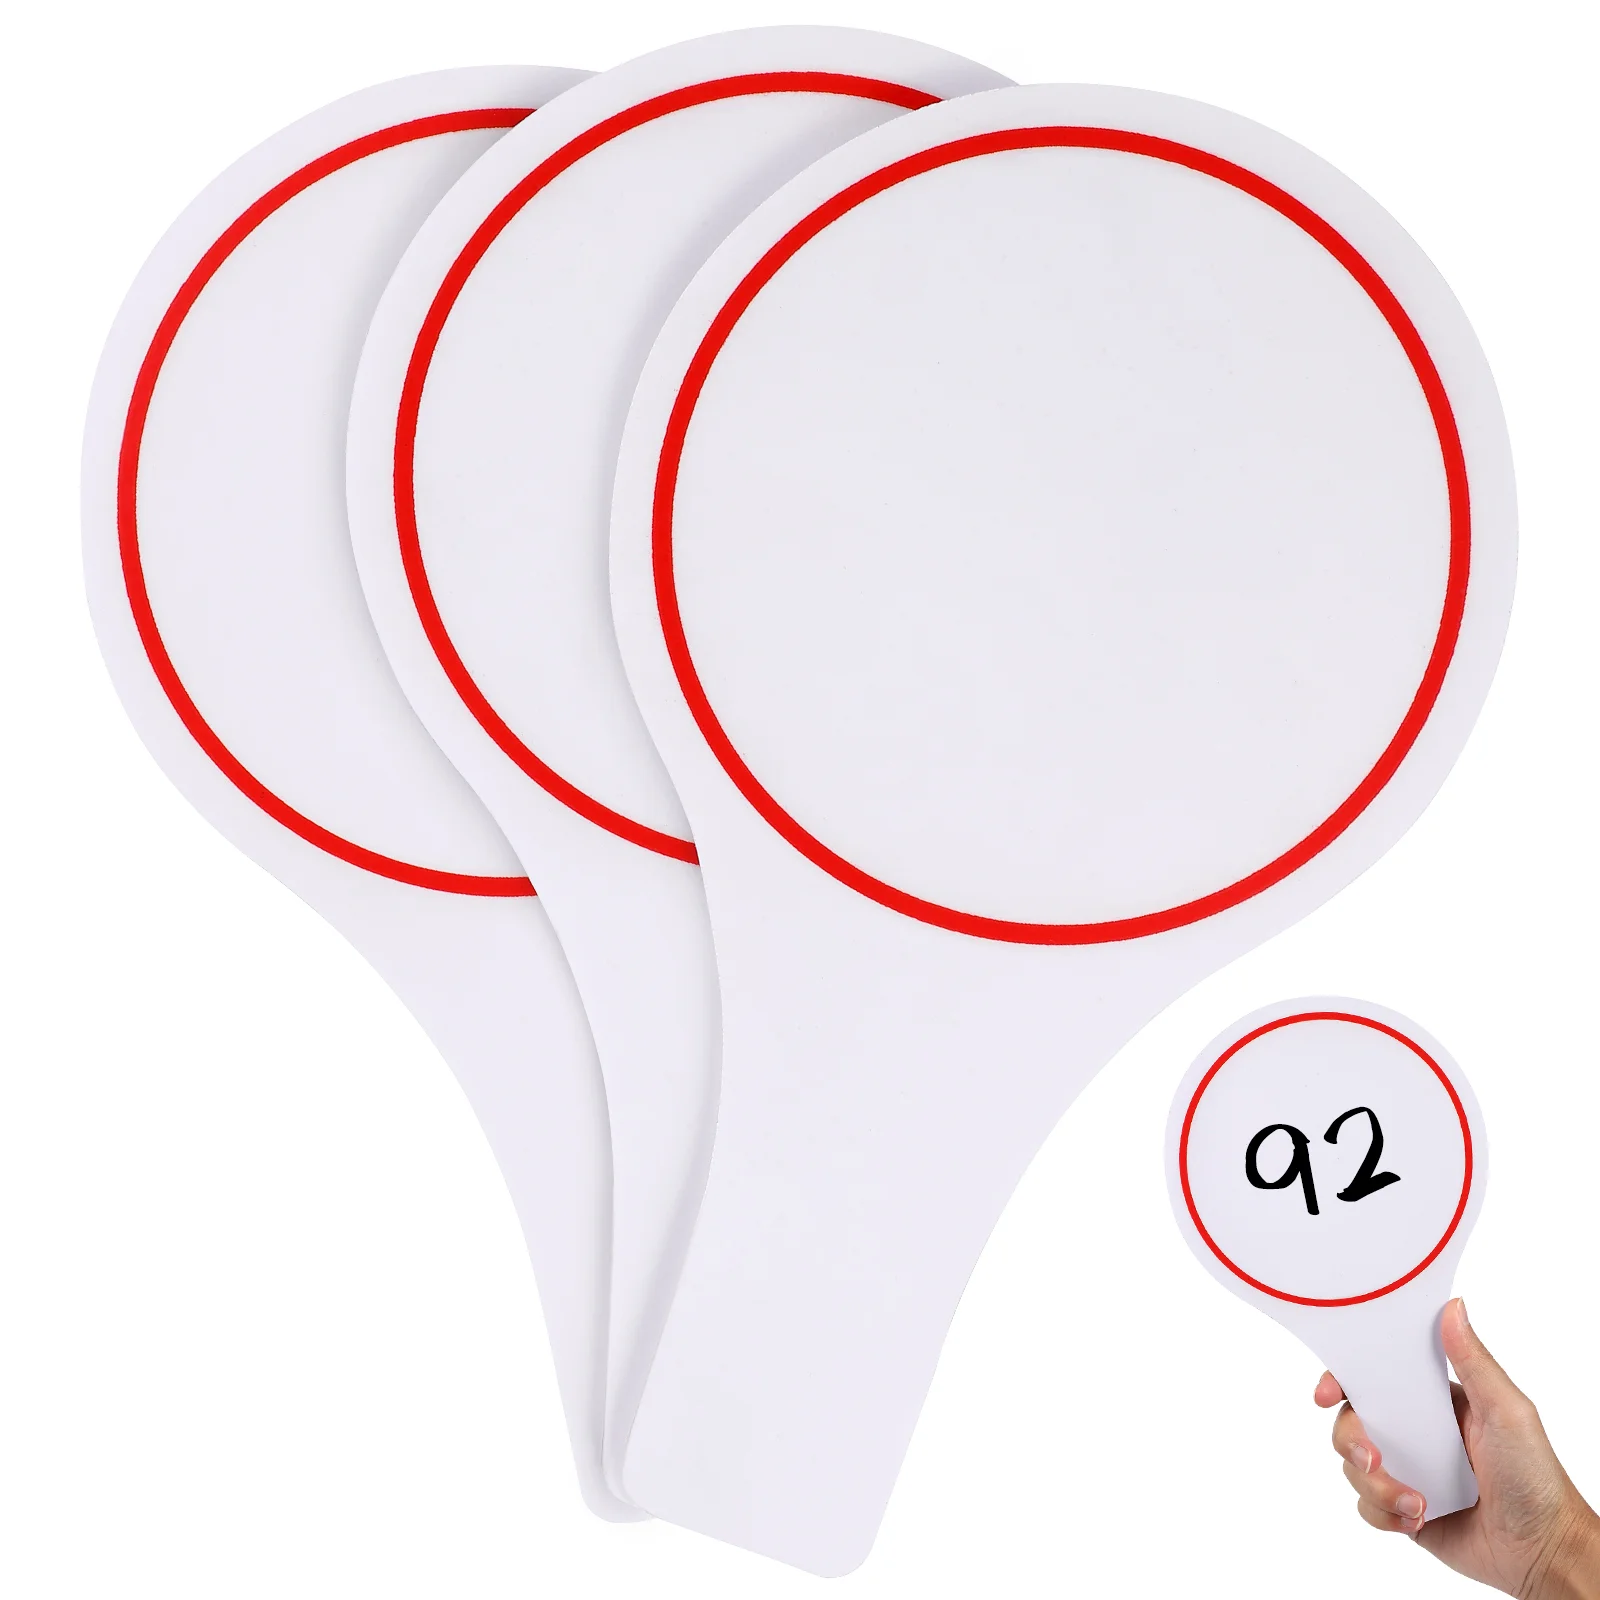 

Score Board Teaching Props Answer Paddle Voting Scoreboard Scoring Handheld White with Handle Blank Flags